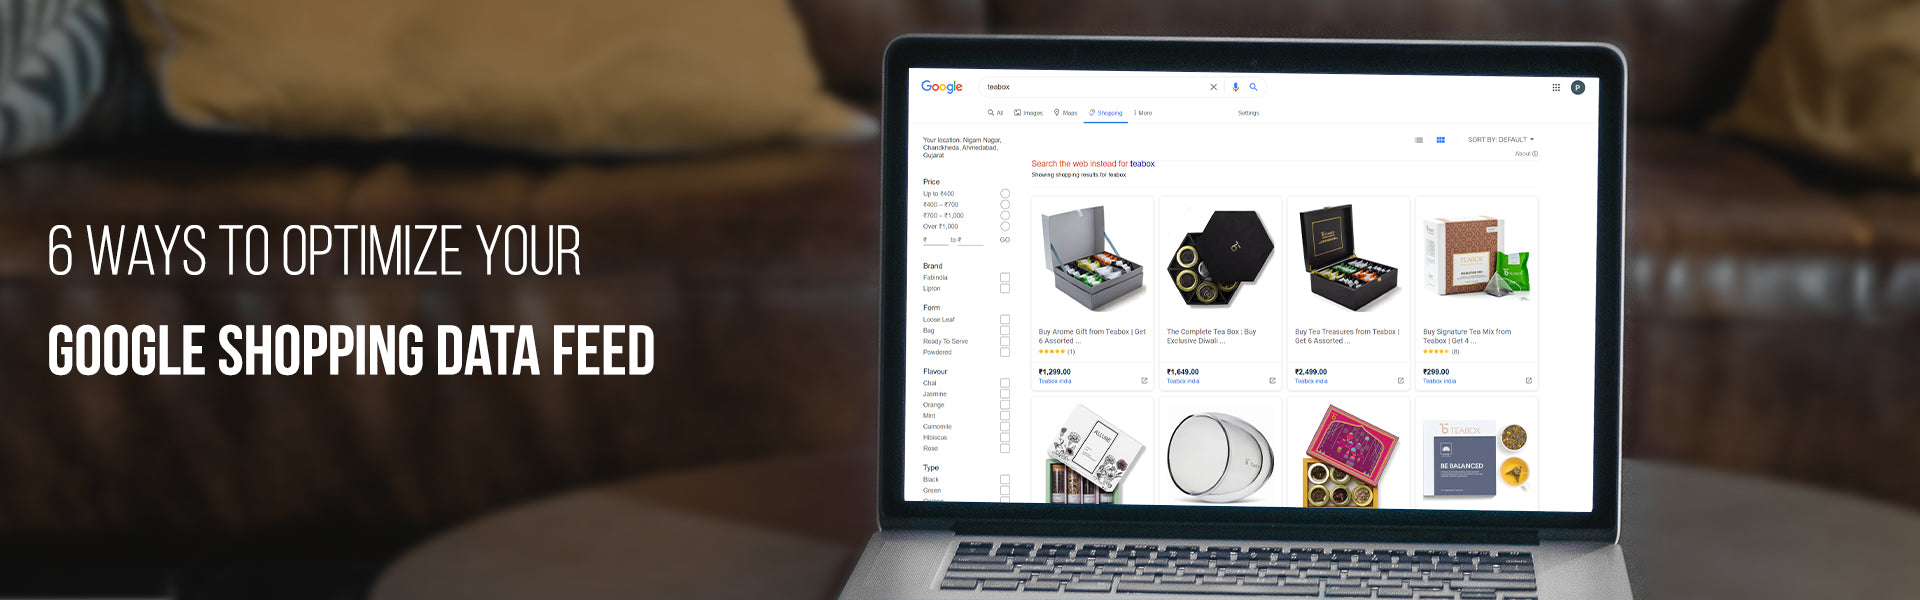 6 Ways to Optimize your Google Shopping Data feed